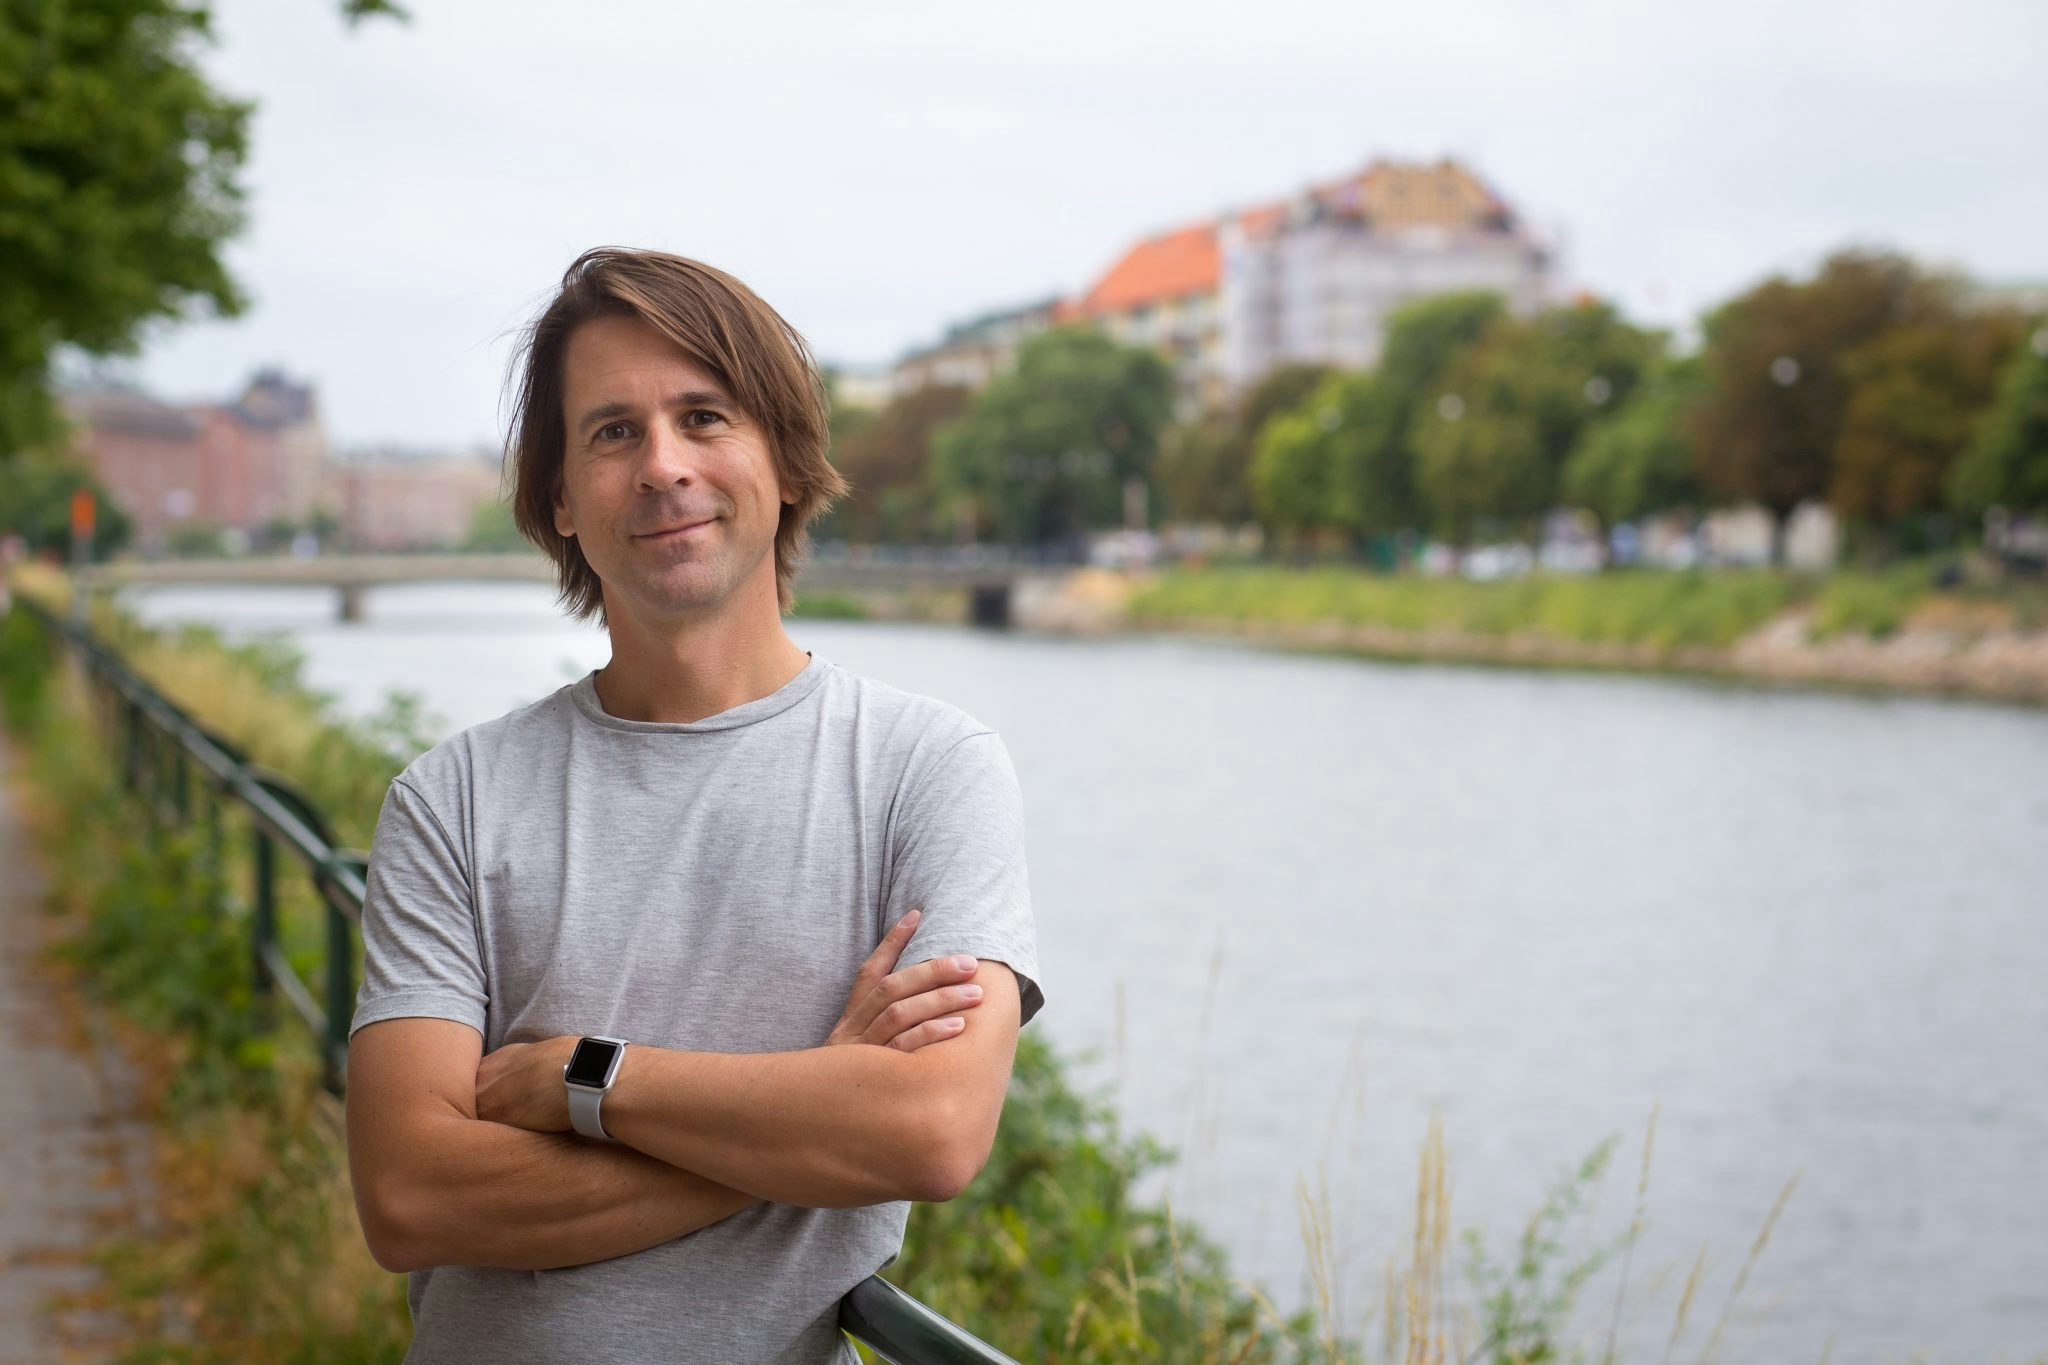 Image of Jan Erik Solem, the Chief Executive and cofounder of Mapillary